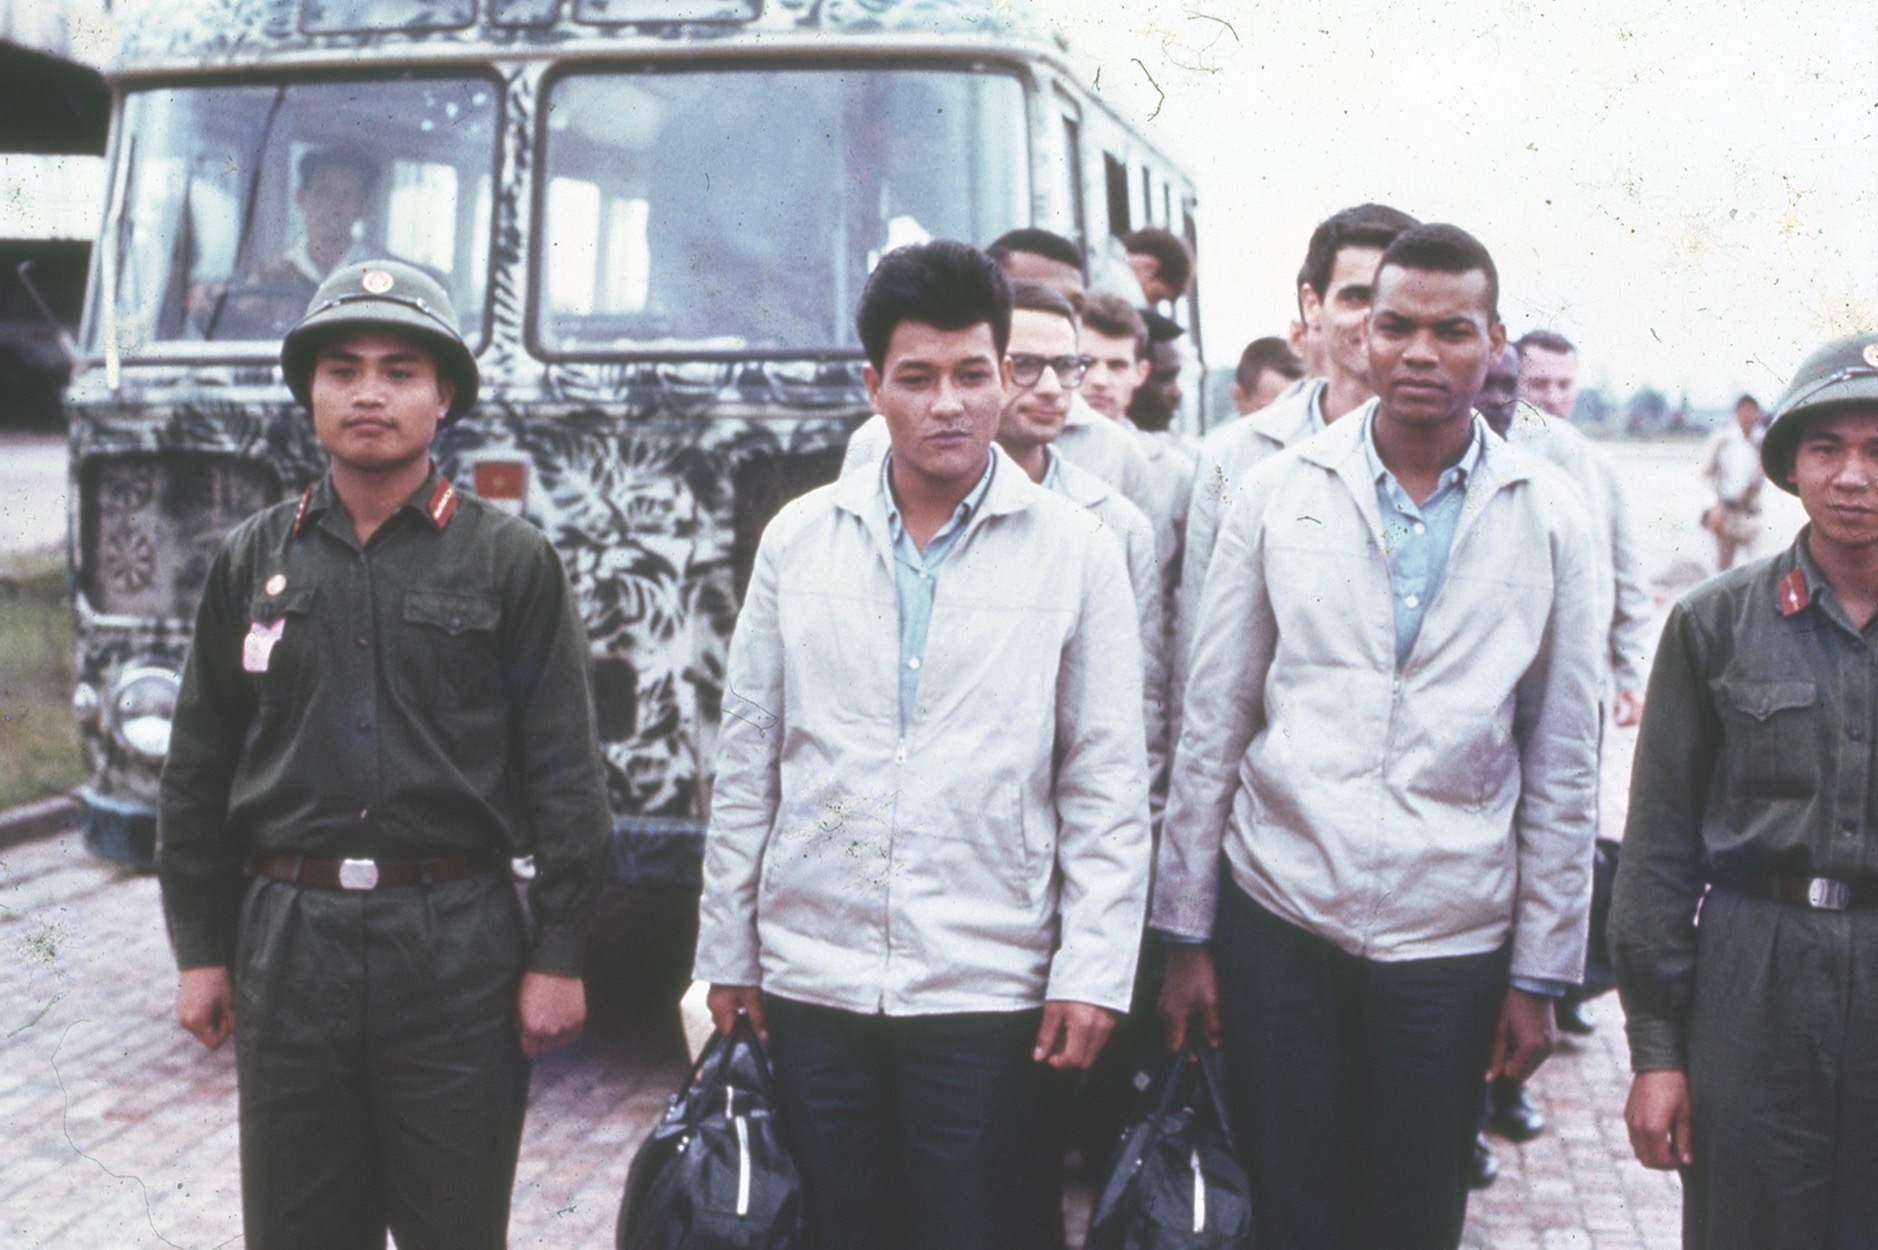 POWs freed in North Vietnam walk from the bus that transported them to Hanoi’s Gia Lam Airport, where they boarded a C-141 Starlifter for a flight to Clark Air Base in the Philippines. (U.S. Air Force)